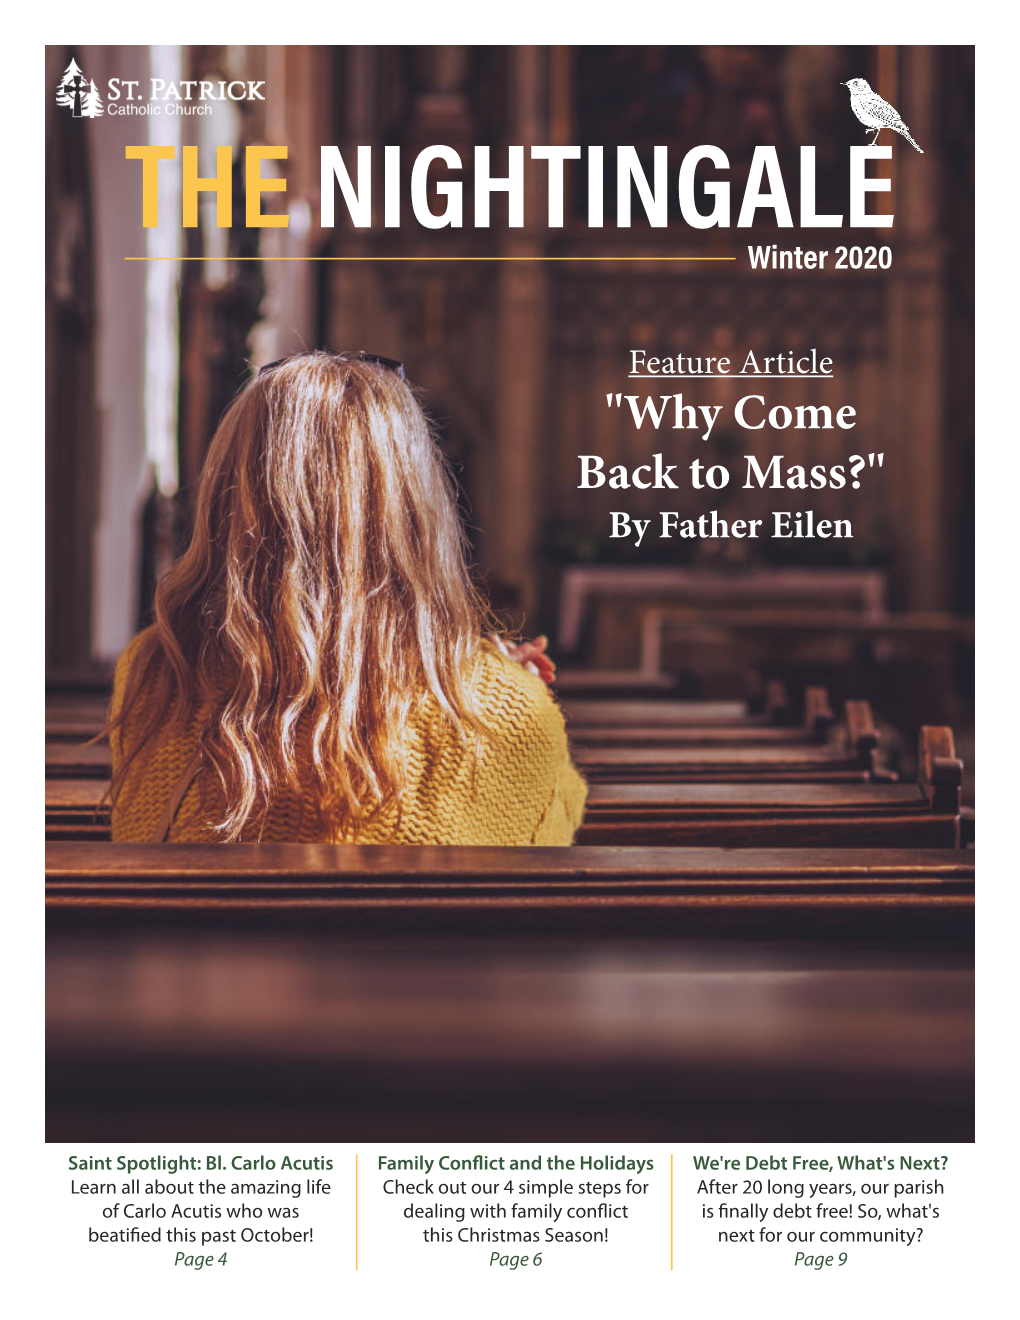 "Why Come Back to Mass?" by Father Eilen